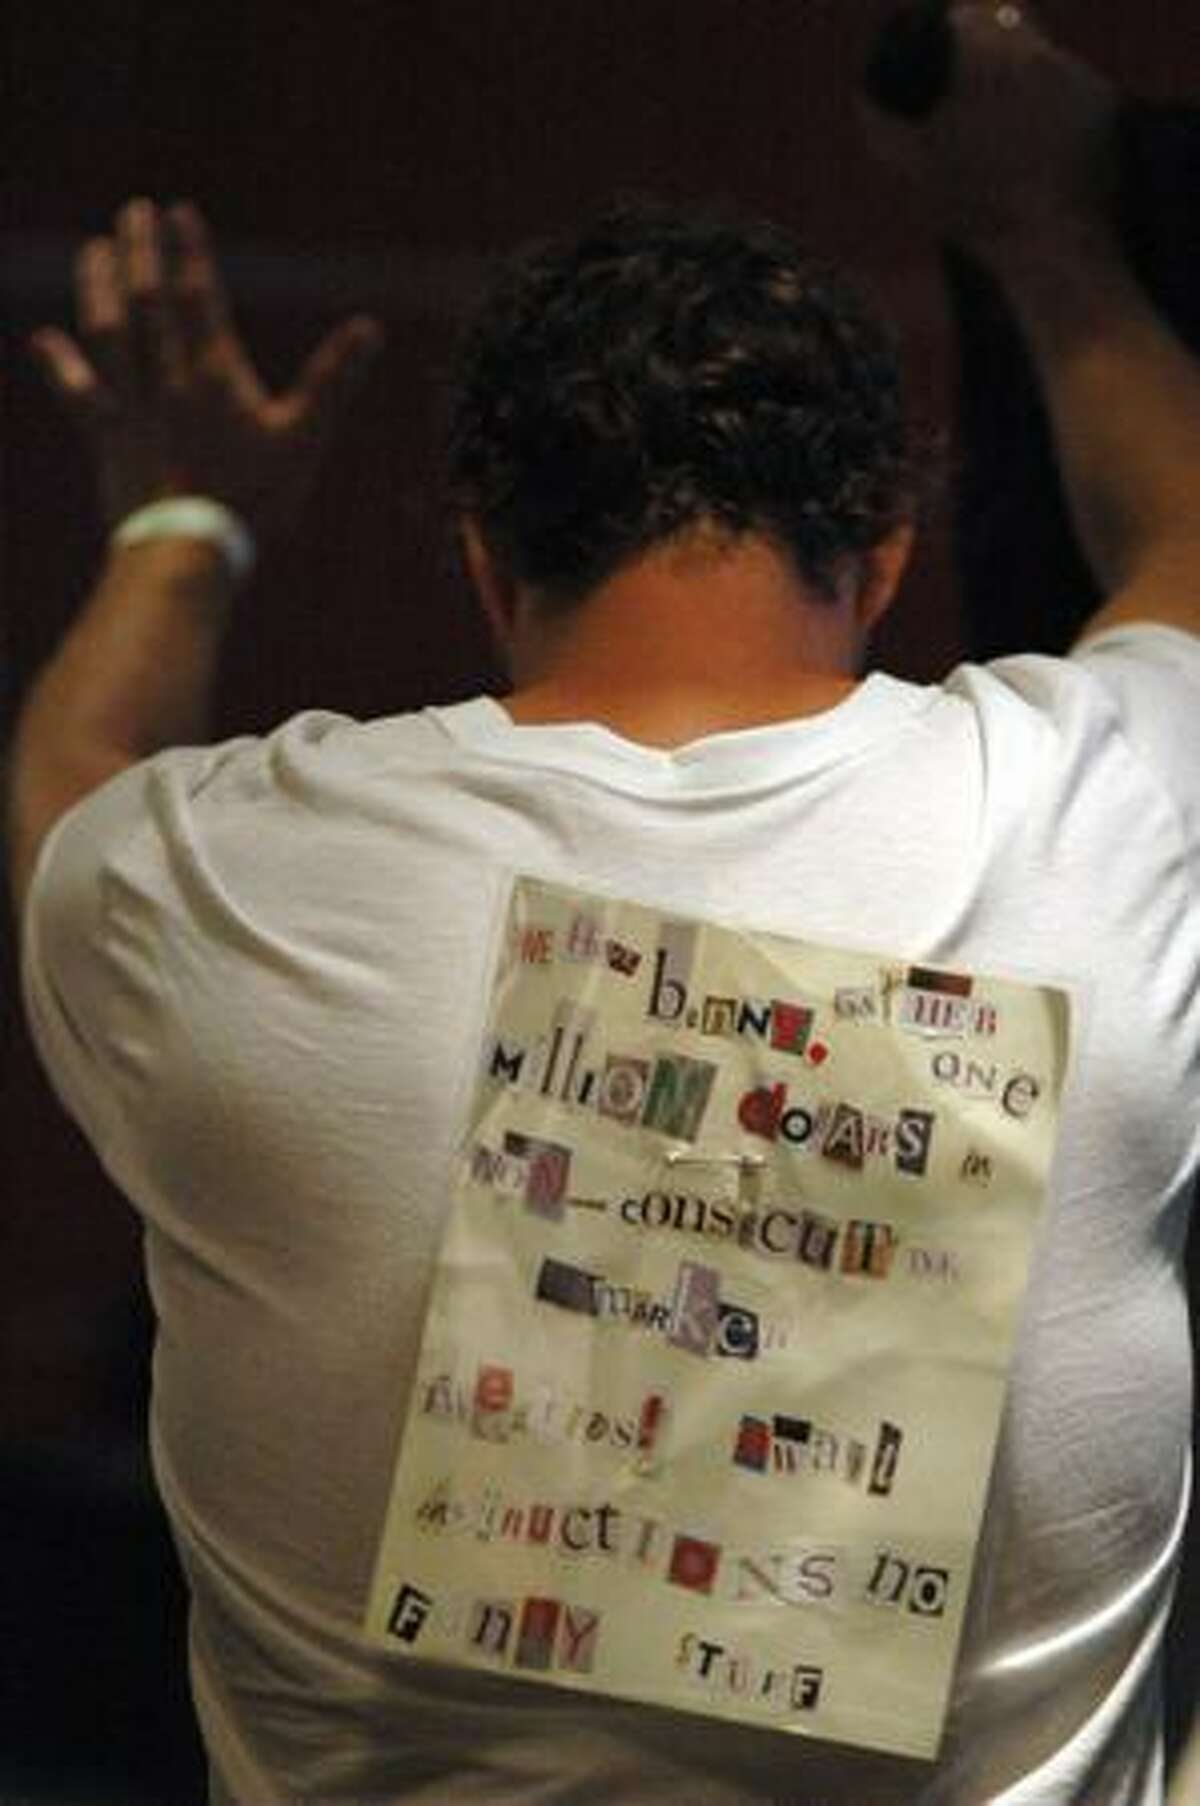 One Lebowski Fest attendee sported this T-shirt decorated with the ransom note from the movie.